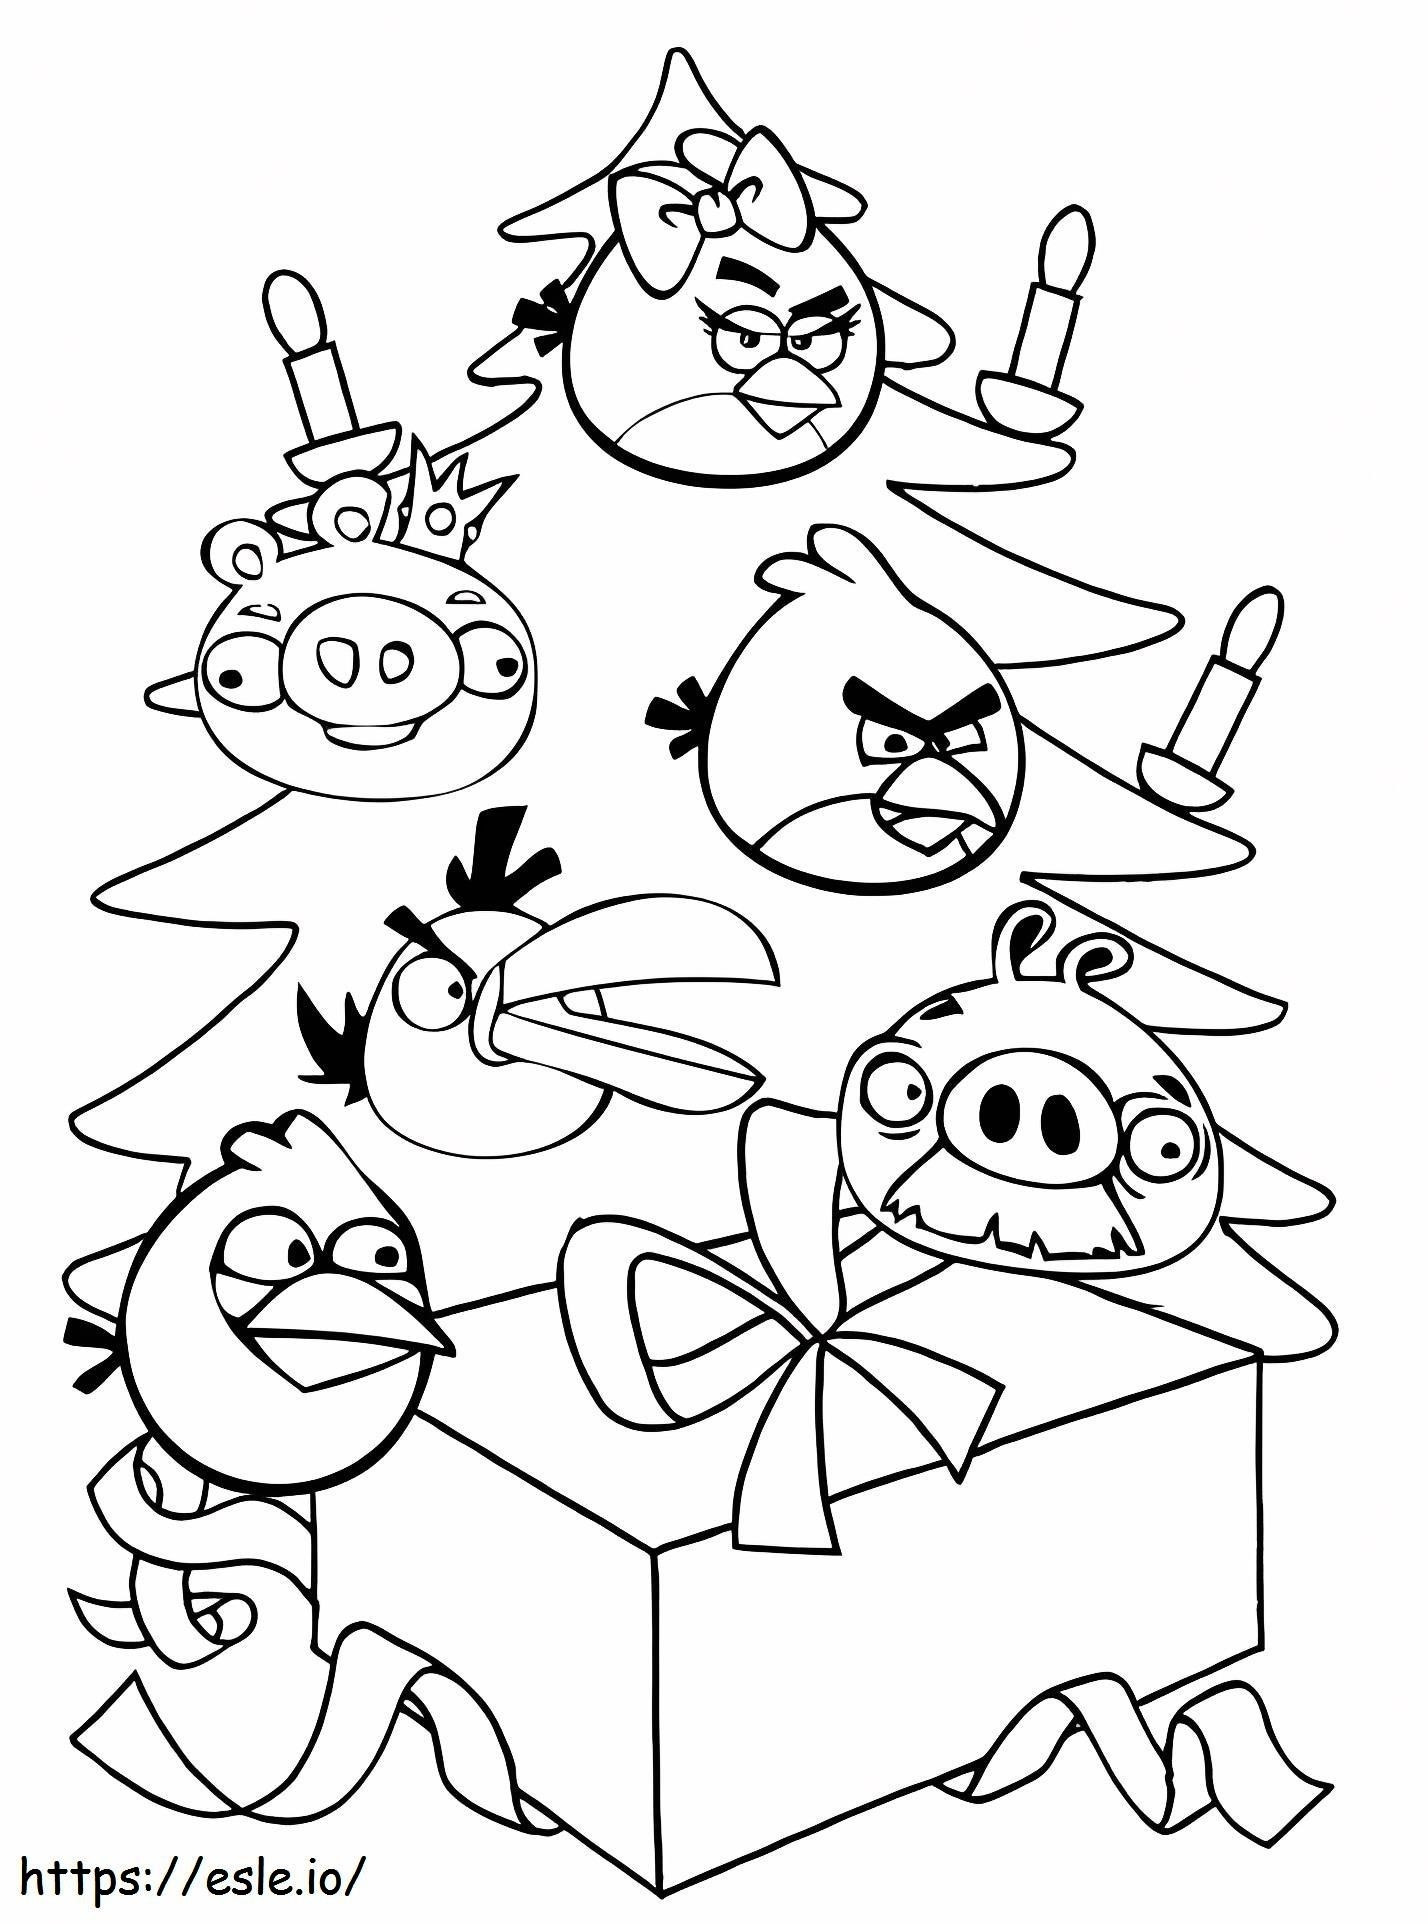 Angry Birds At Christmas coloring page